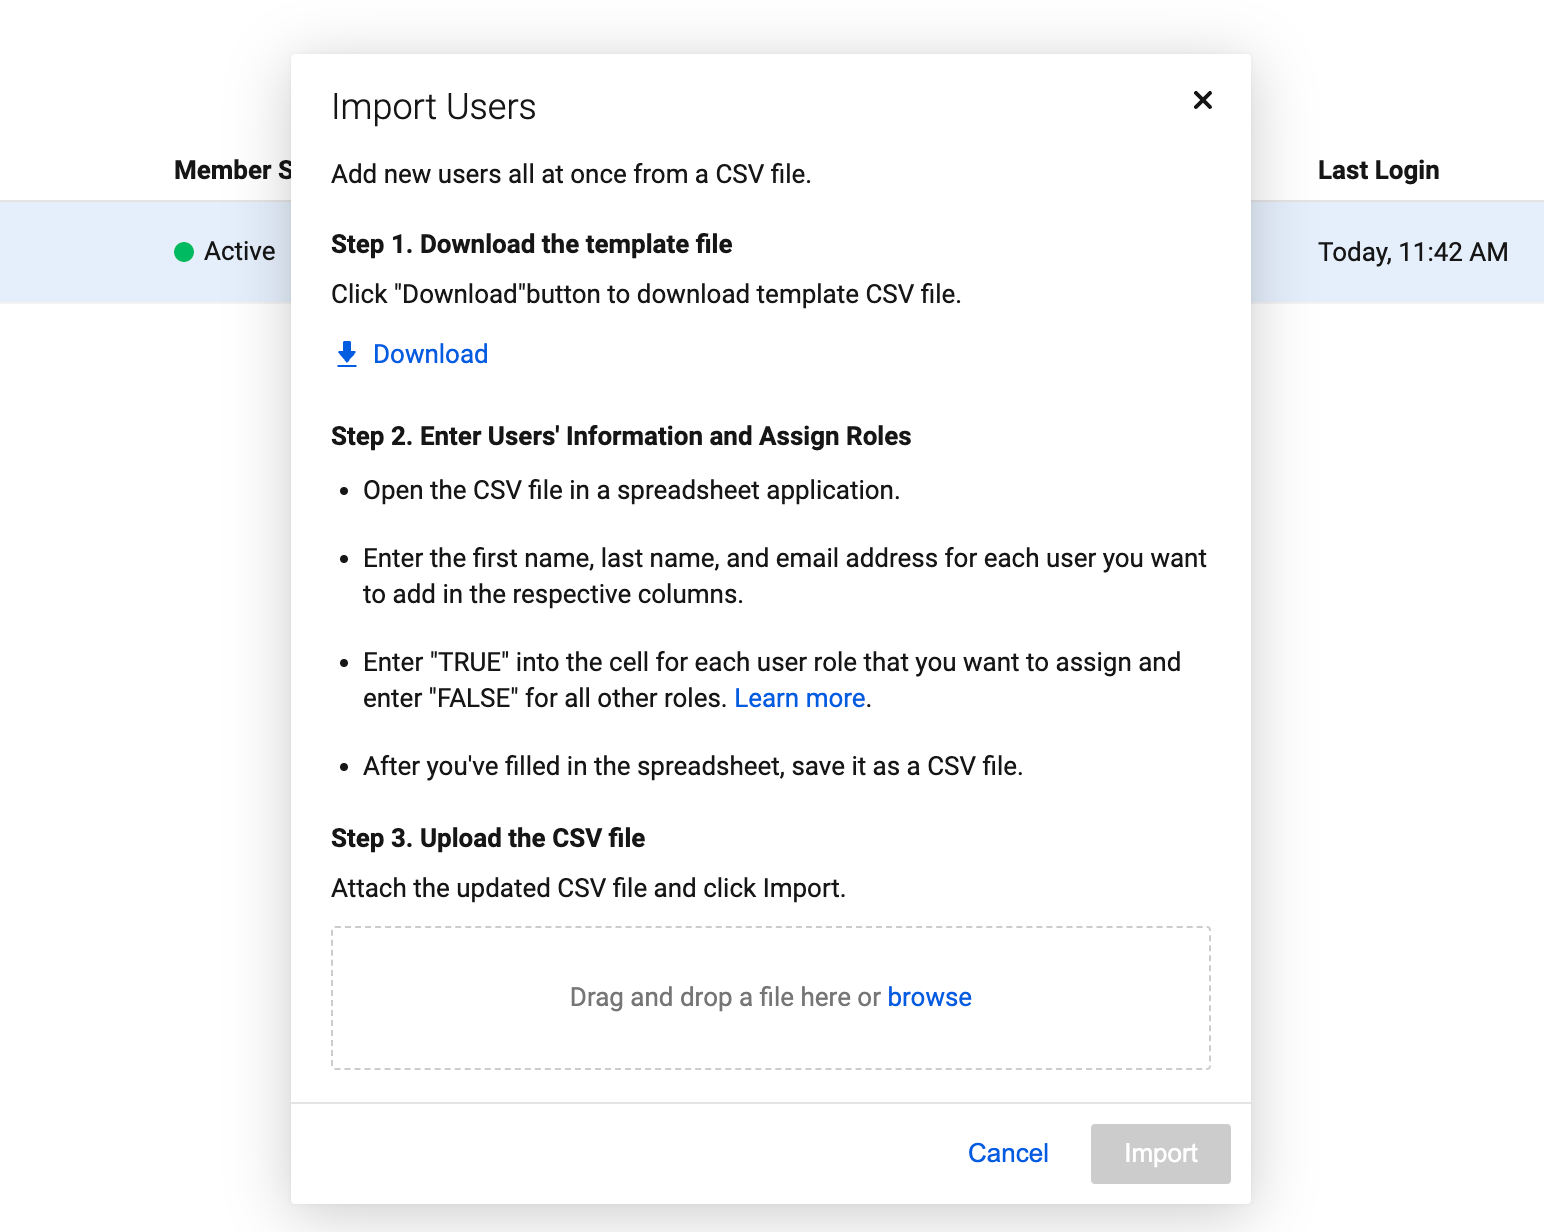 Import Users form